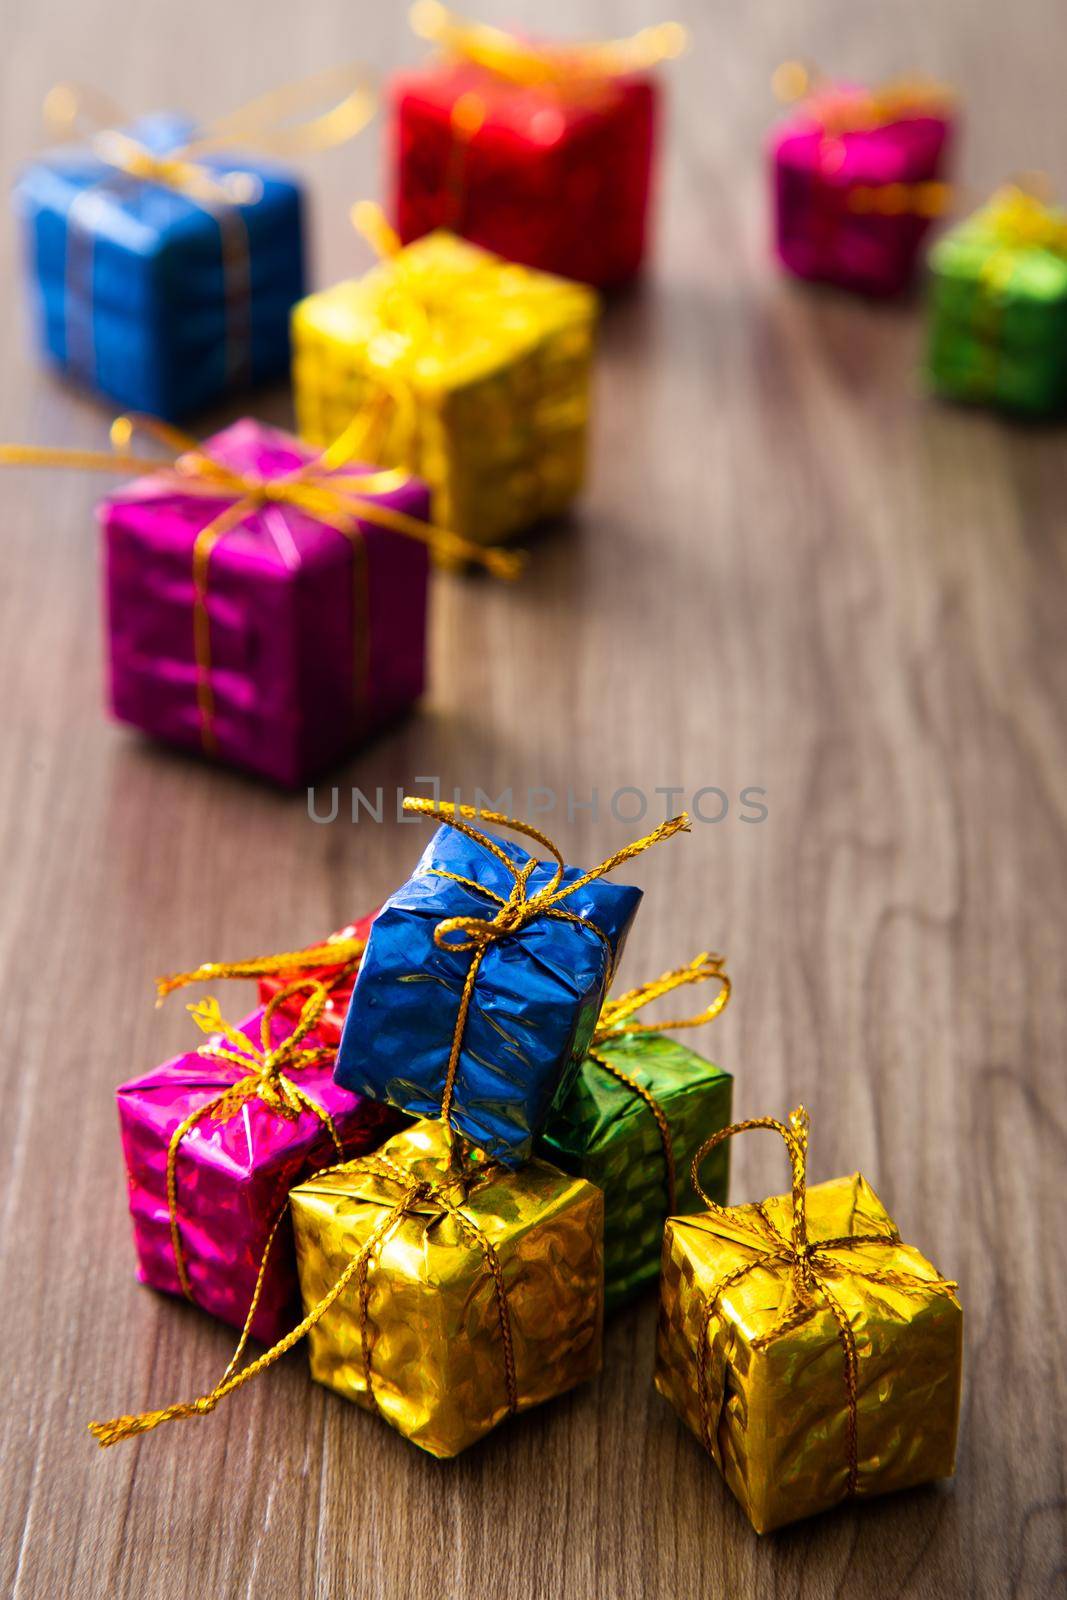 Christmas composition. Christmas gifts, decorations on wooden background.  by tehcheesiong